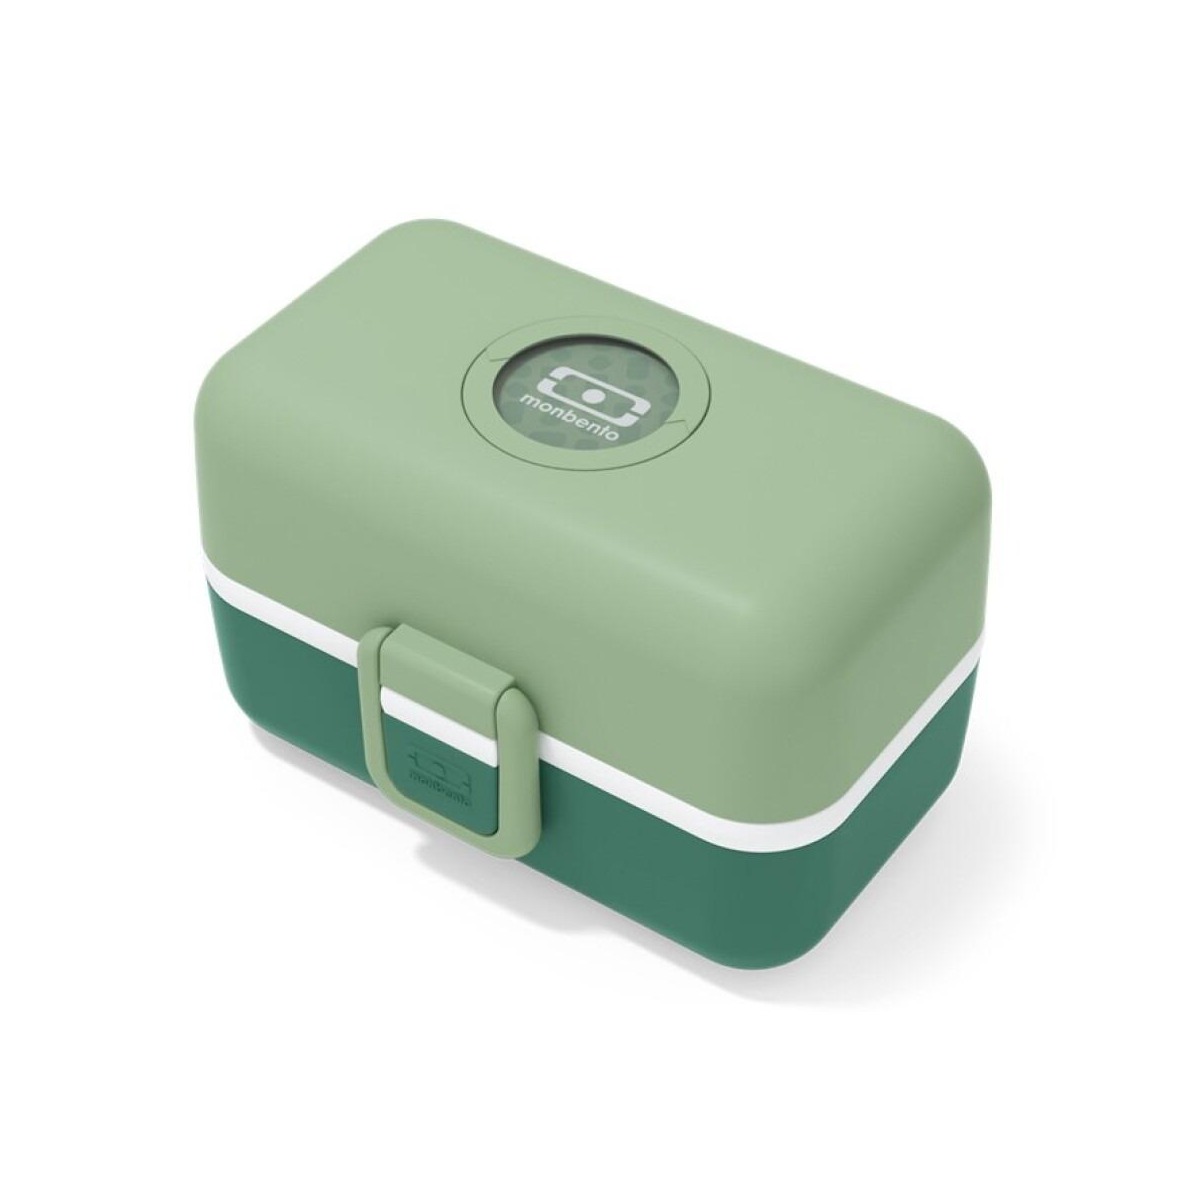 Lunch Box Mb tremor Green forest de Monbento